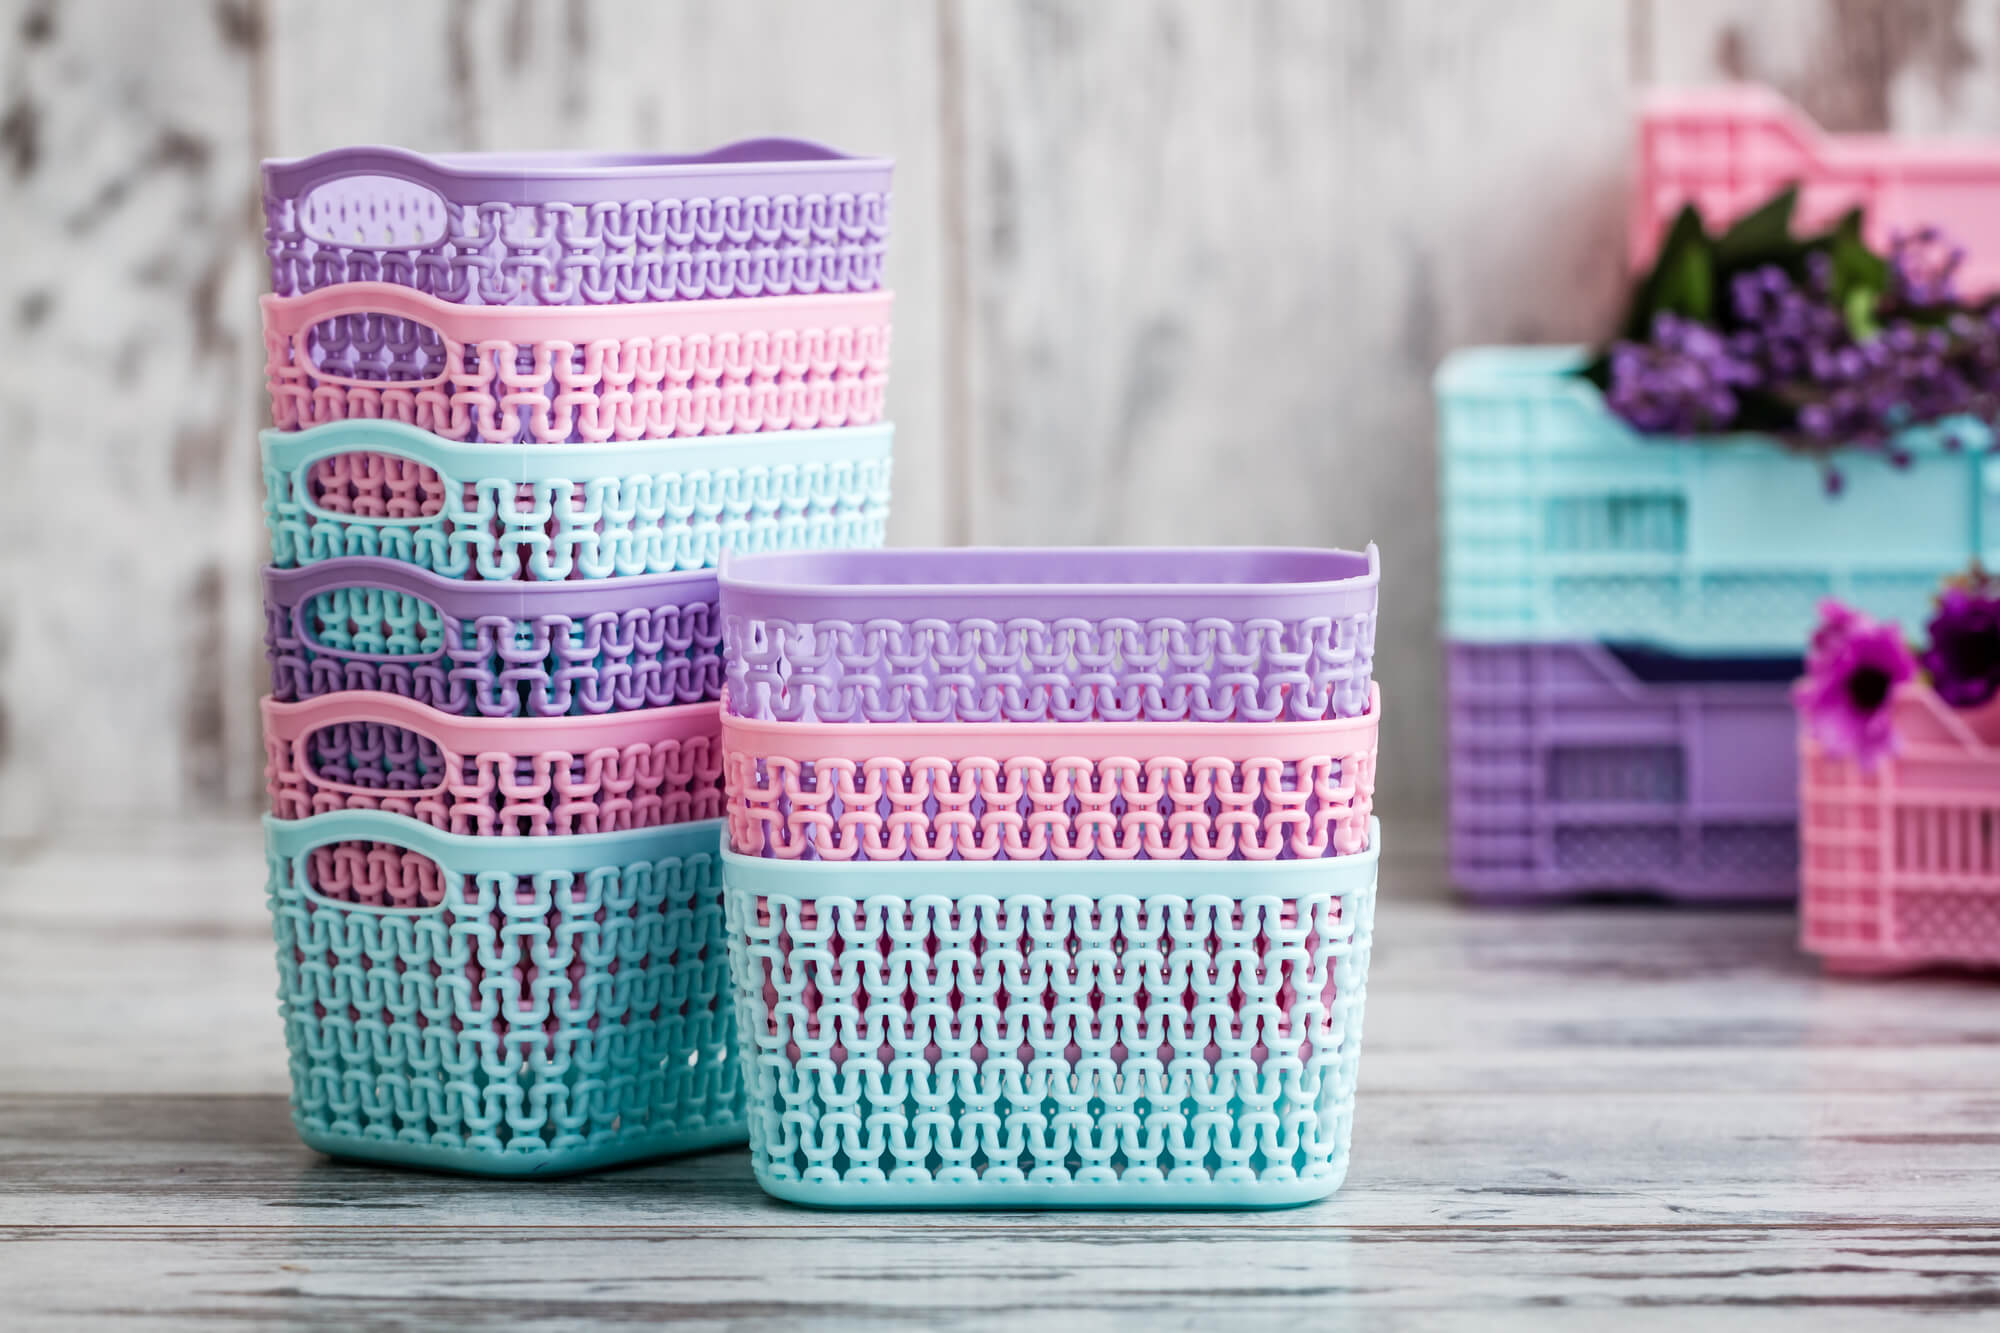 Lots of colorful baskets for use around the house